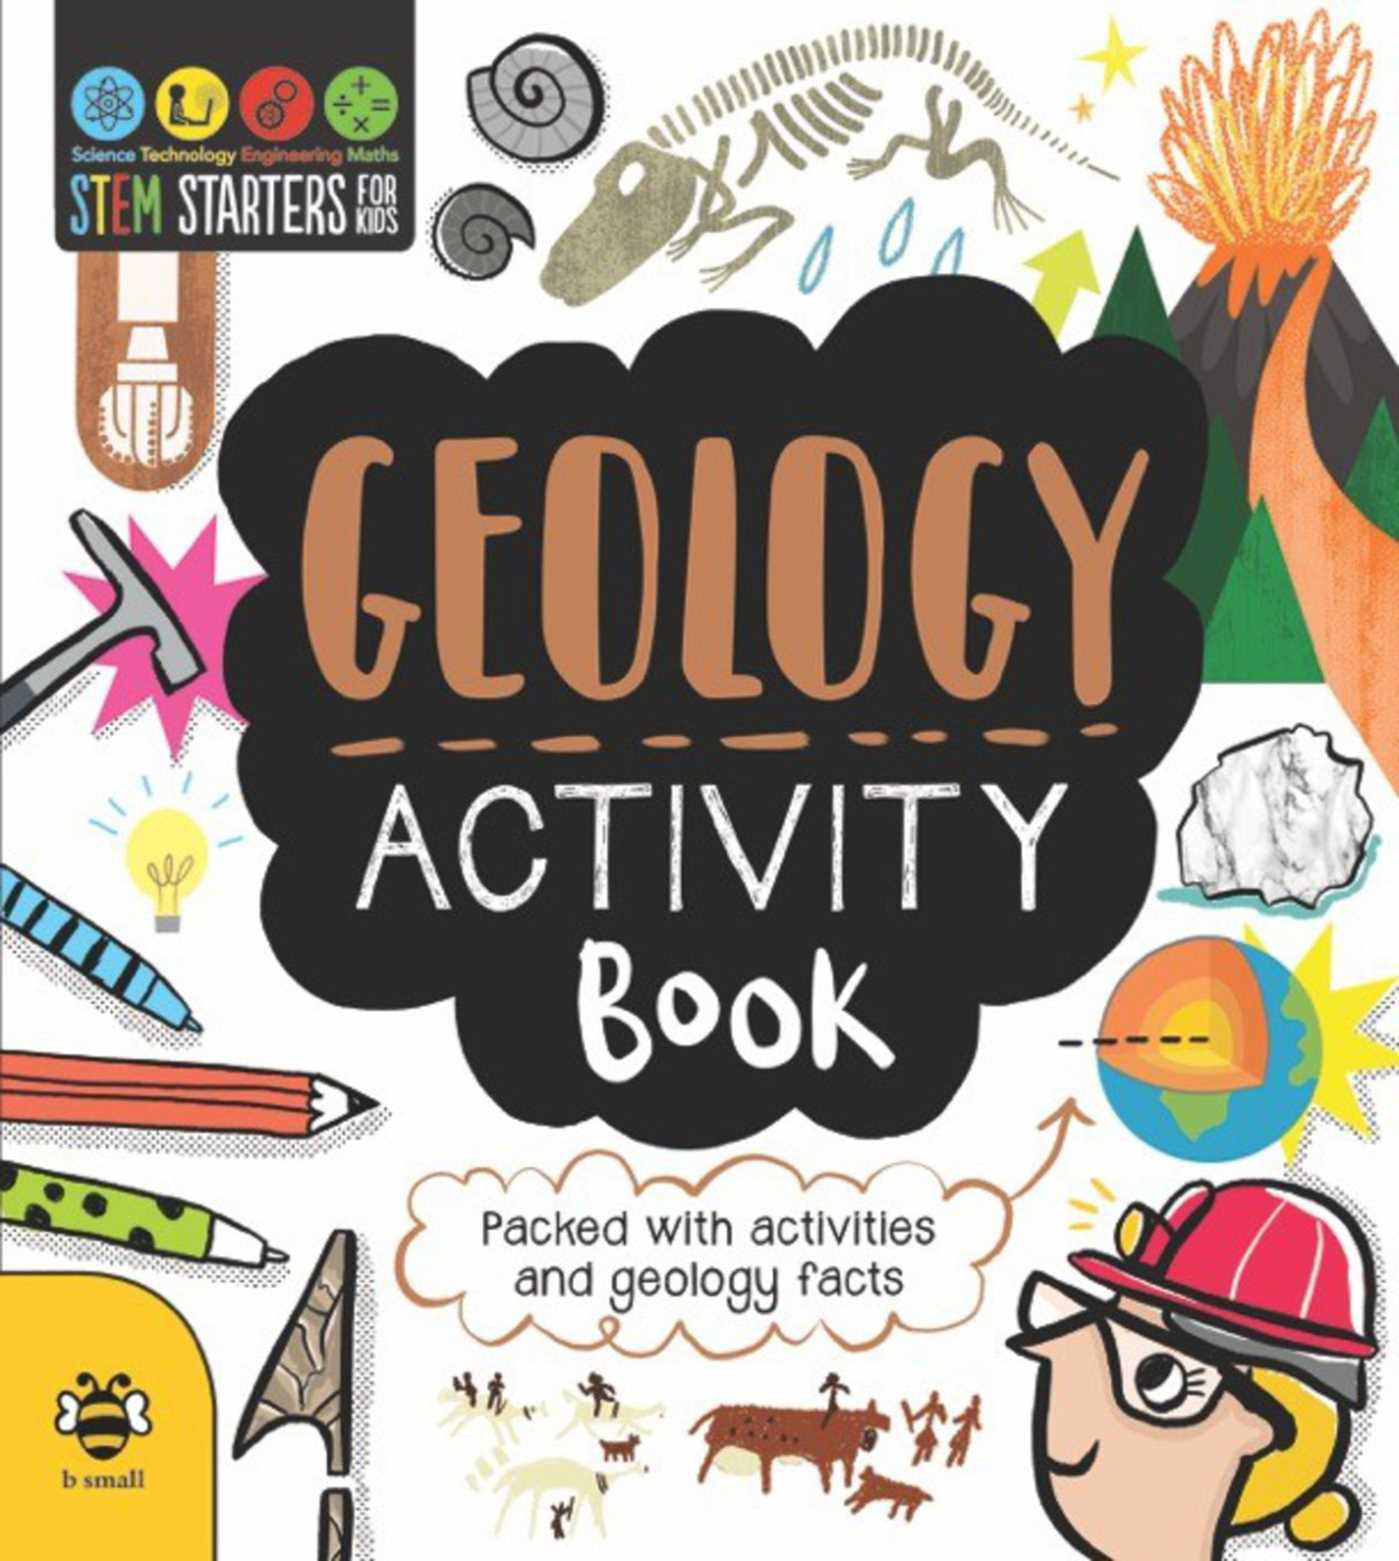 Download Stem Starters For Kids Stem Starters For Kids Geology Activity Book Packed With Activities And Geology Facts Paperback Walmart Com Walmart Com